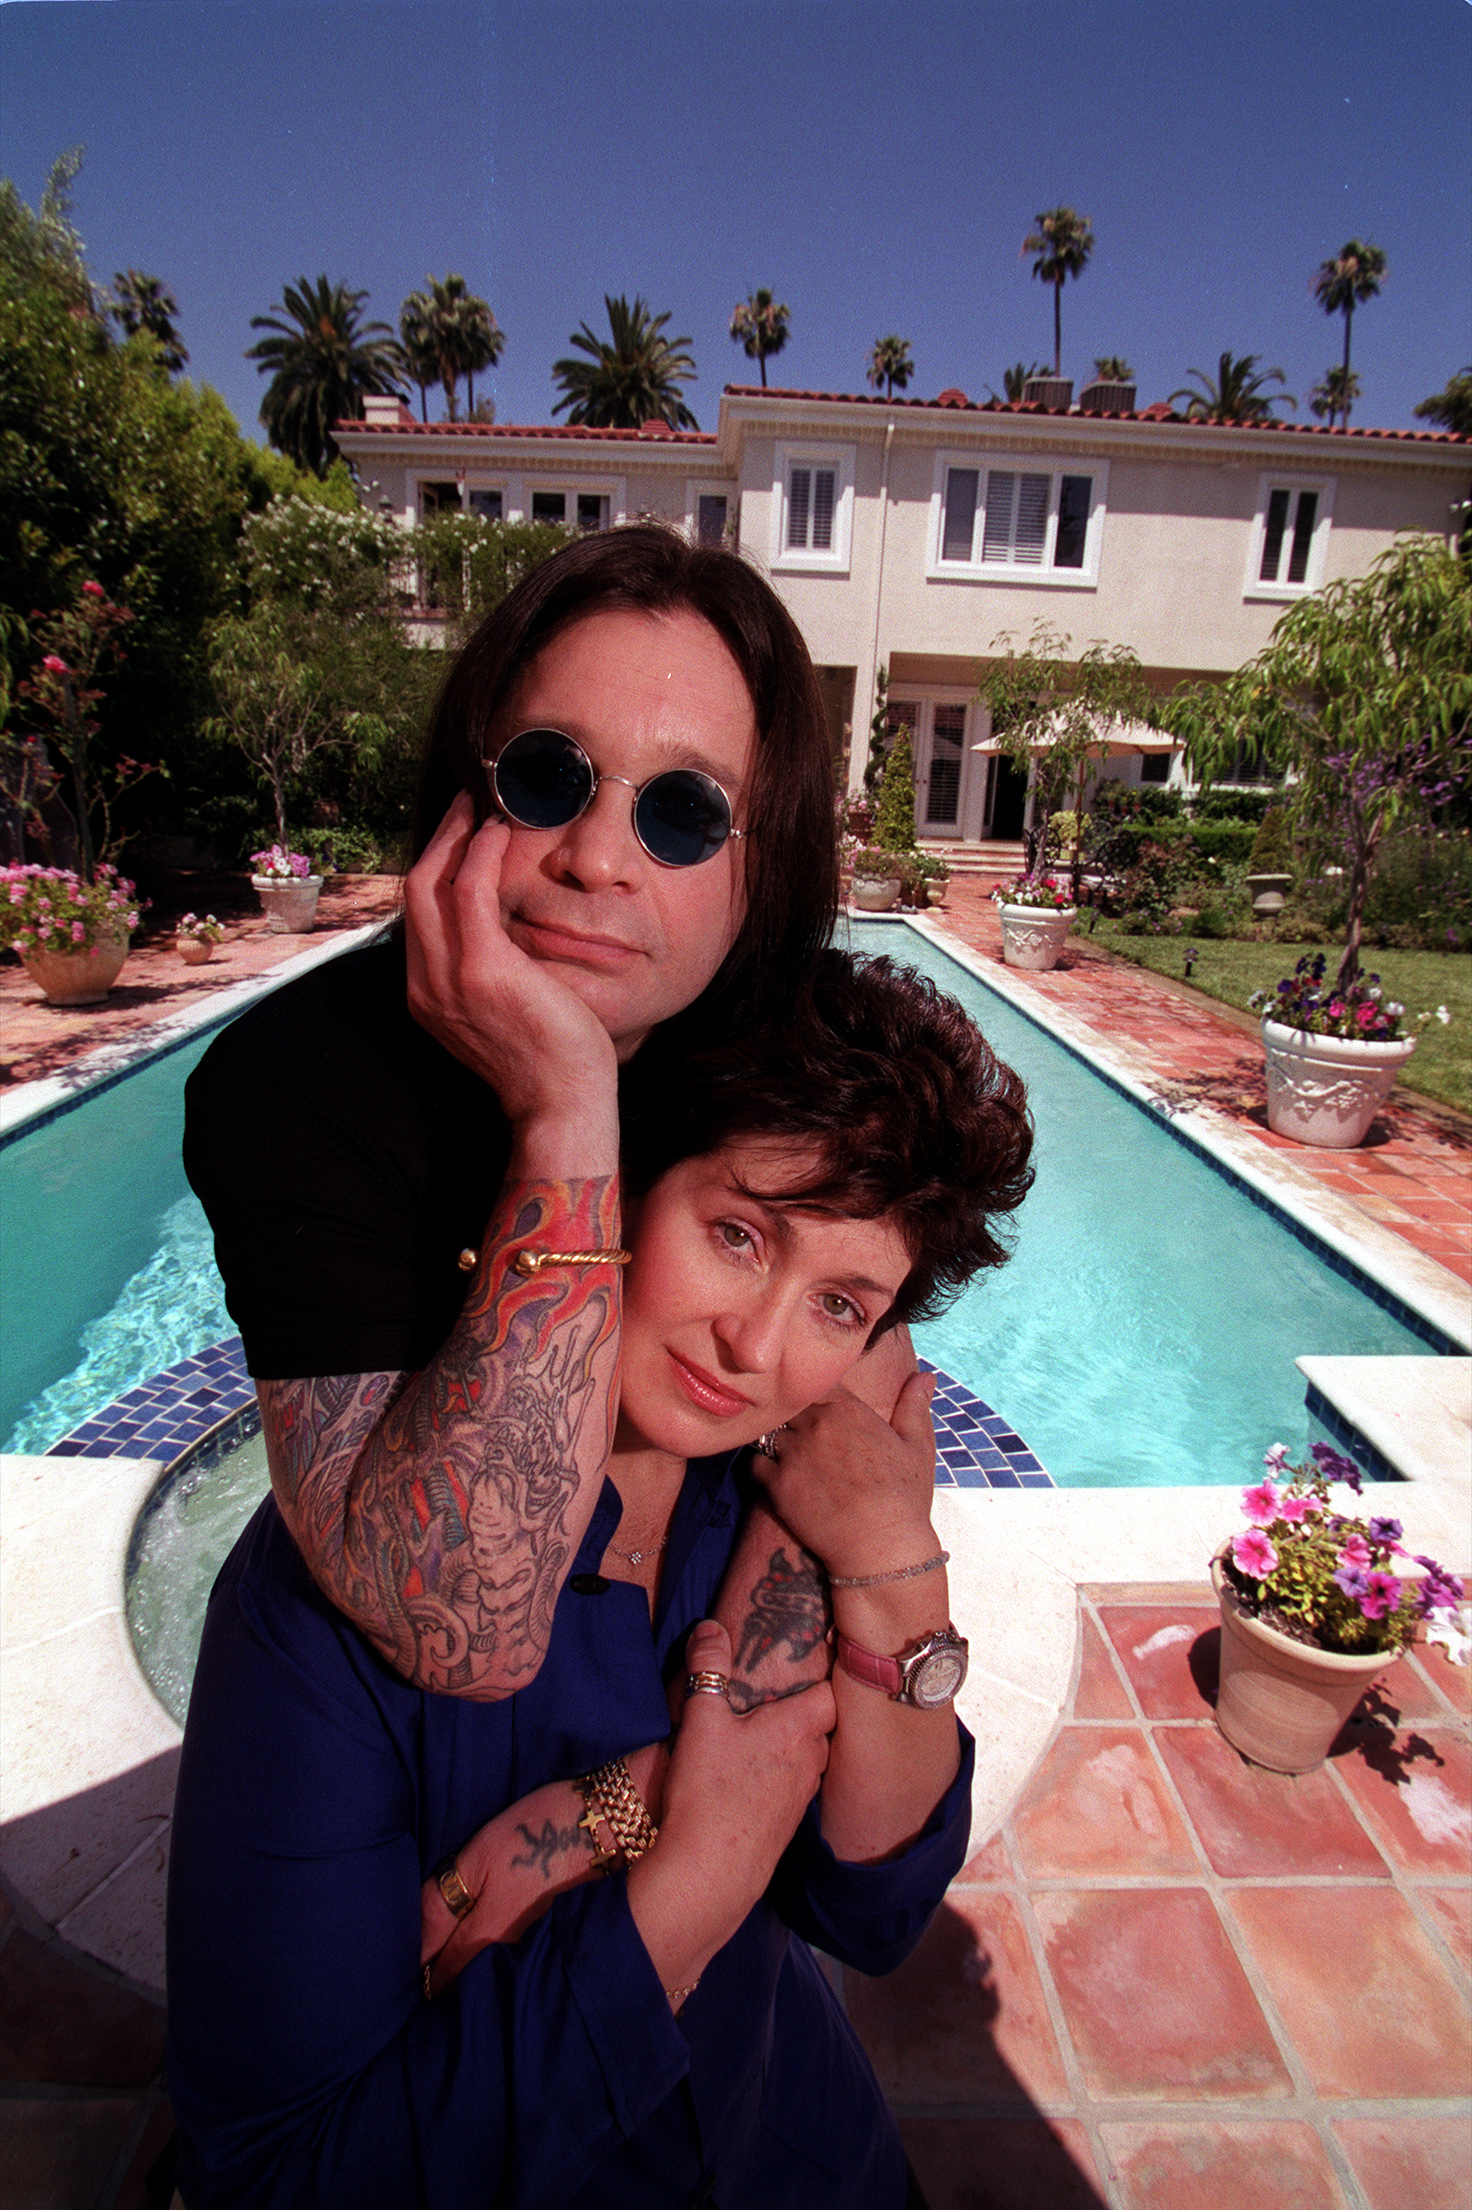 Ozzy and Sharon Osbourne in the backyard of their home in Beverly Hills, California in June 5, 2000 | Source: Getty Images